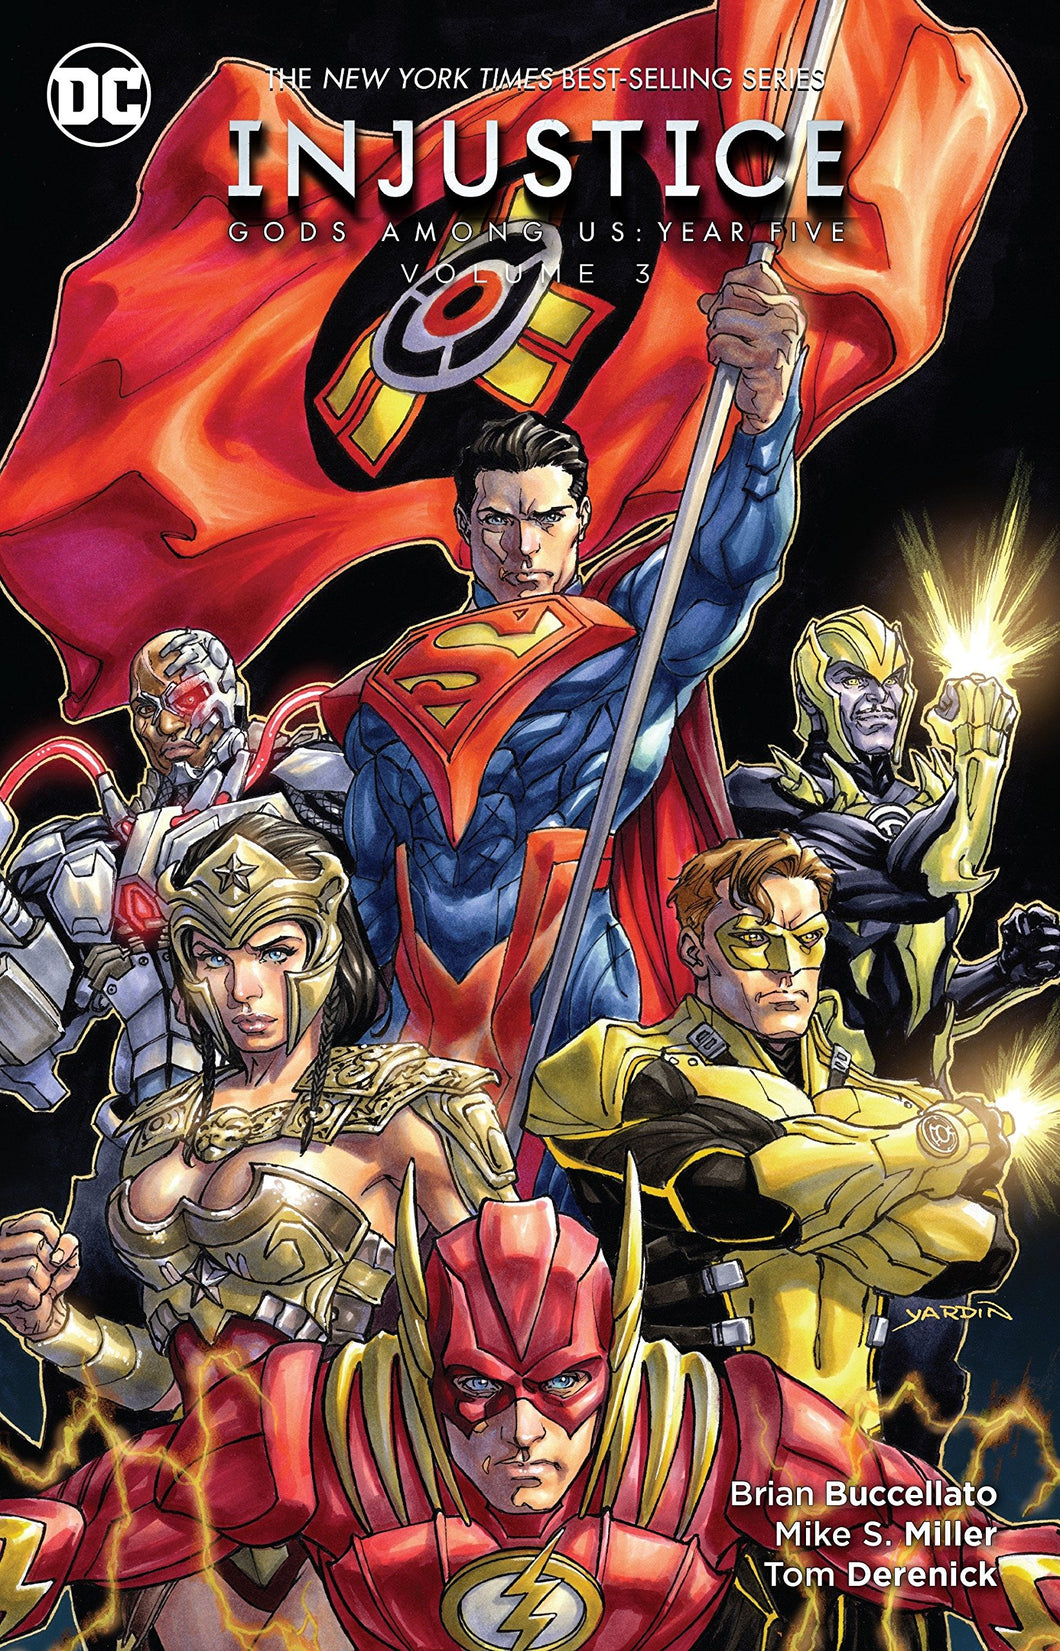 Injustice : Gods Among Us : Year Five Vol. 3